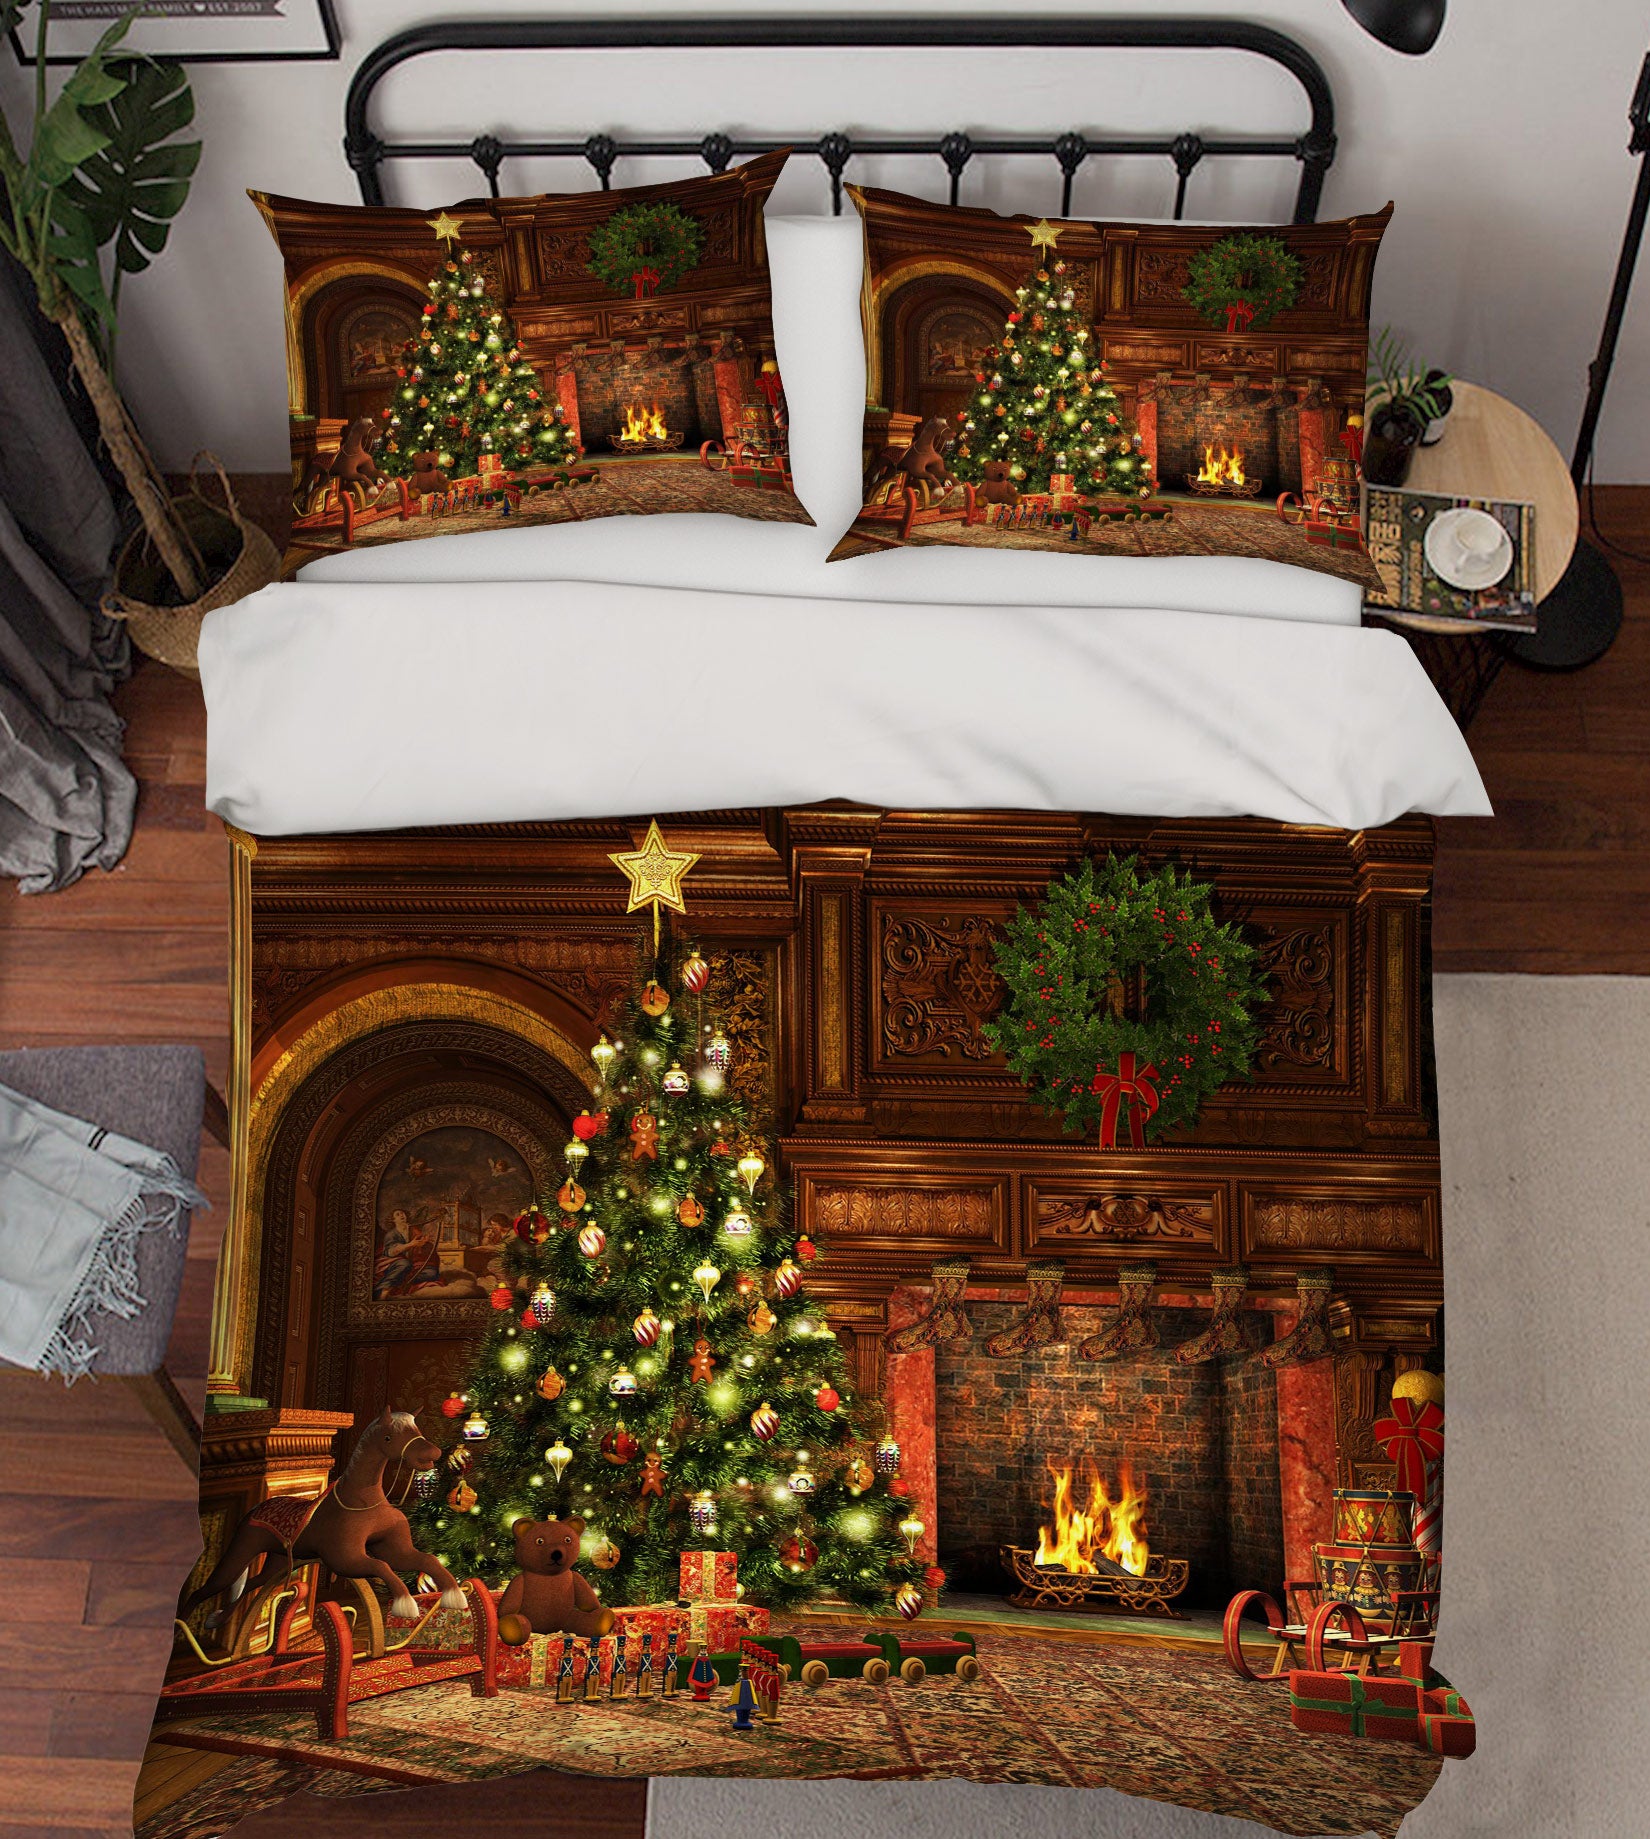 3D Fireplace Tree 52115 Christmas Quilt Duvet Cover Xmas Bed Pillowcases